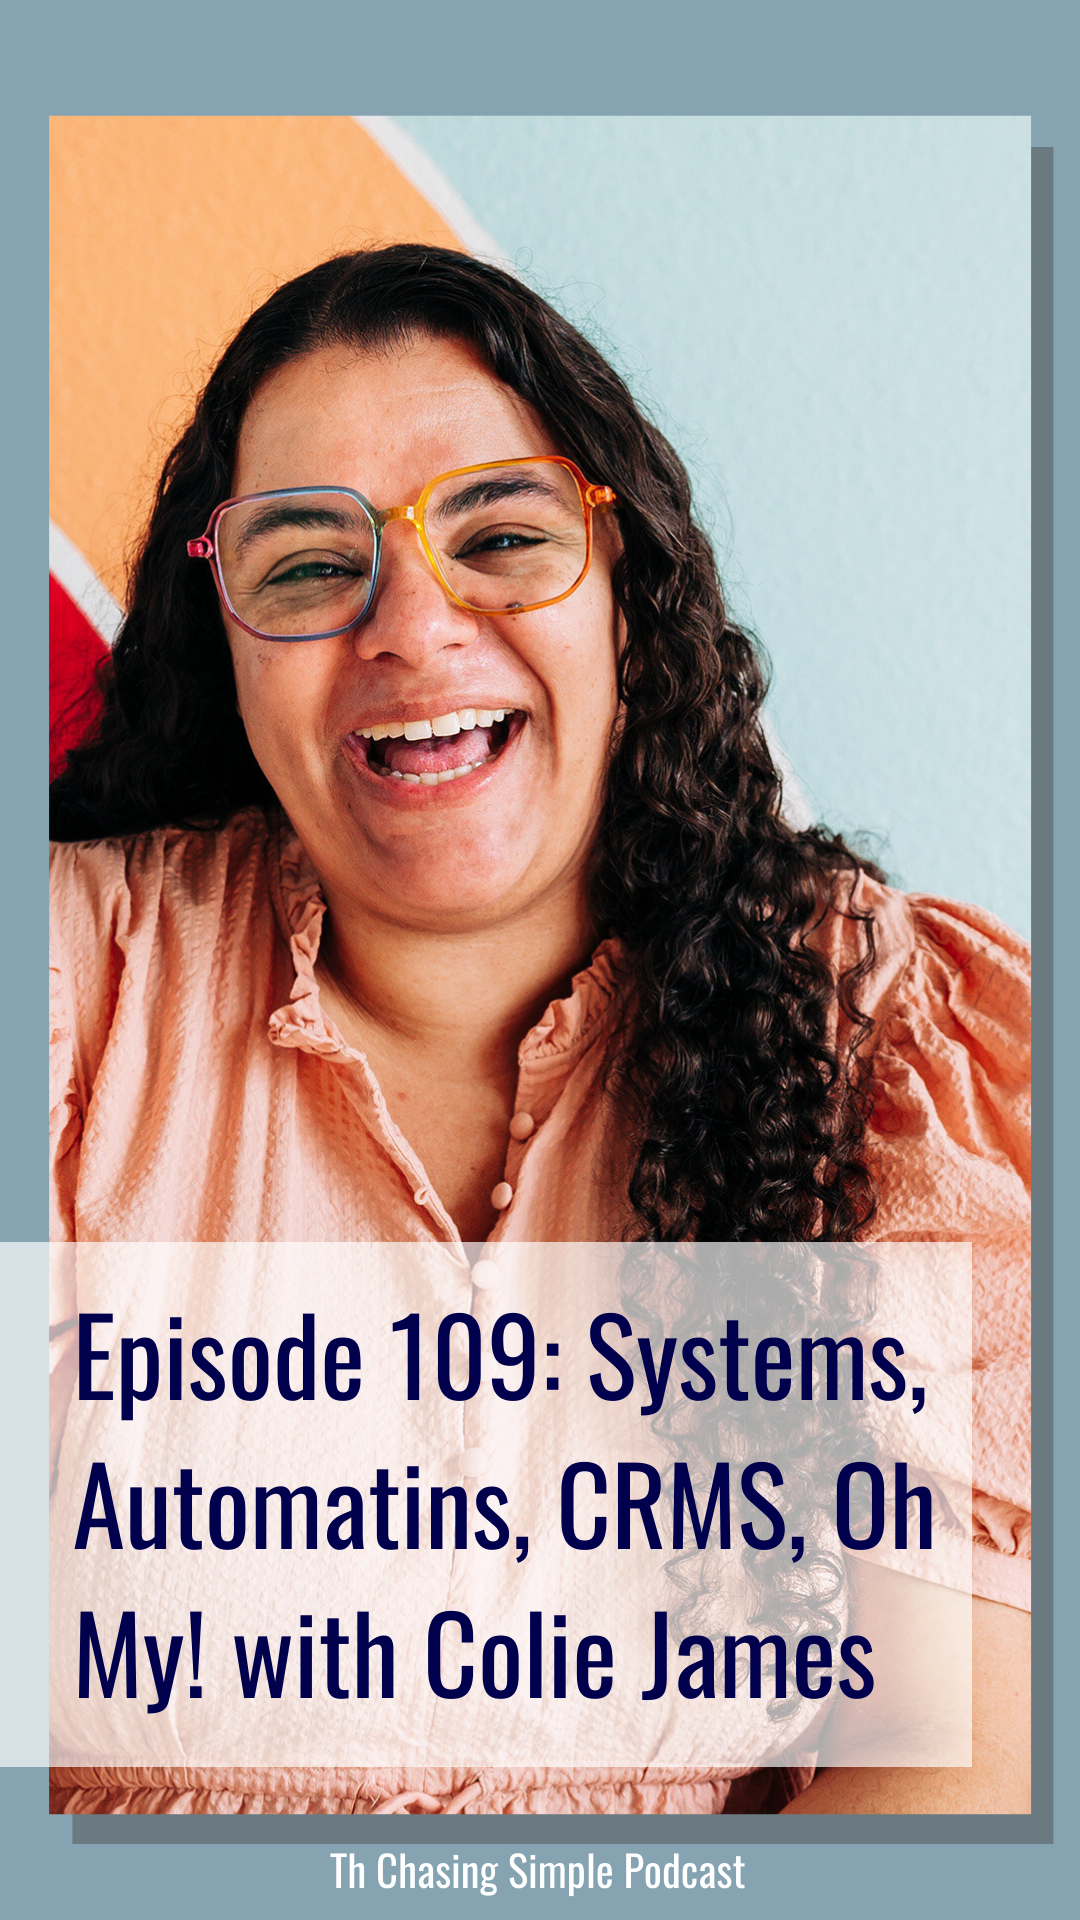 Looking for a CRM software for small business? Colie James is covering CRMs, systems, automations, and more in this episode!